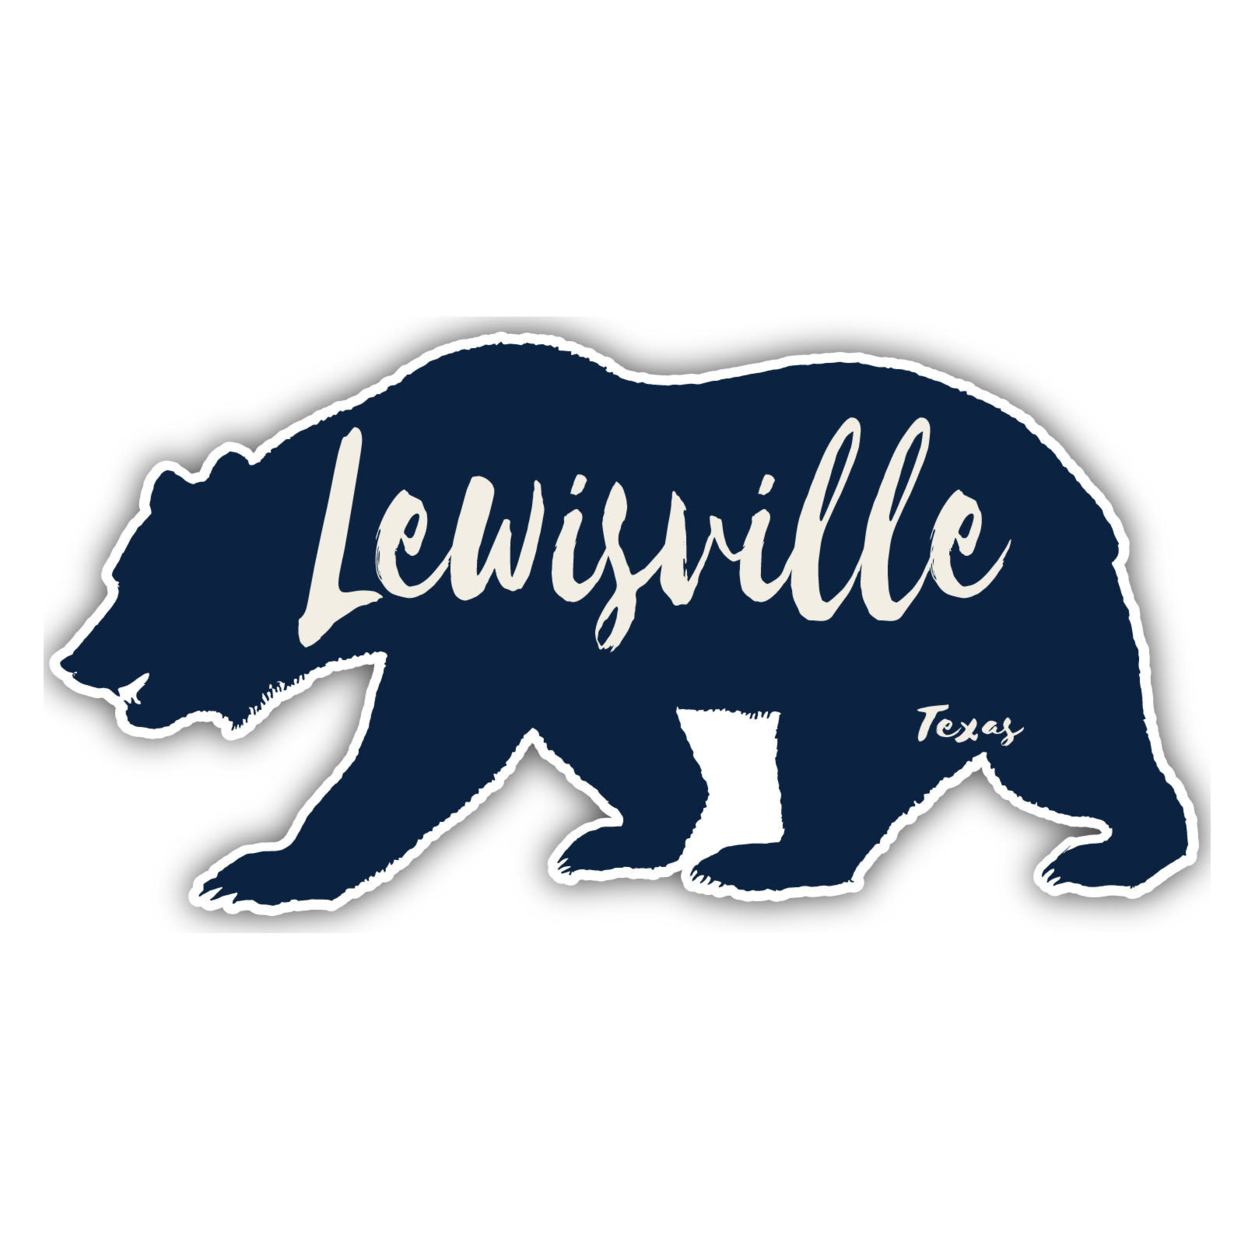 Lewisville Texas Souvenir Decorative Stickers (Choose Theme And Size) - 2-Inch, Bear